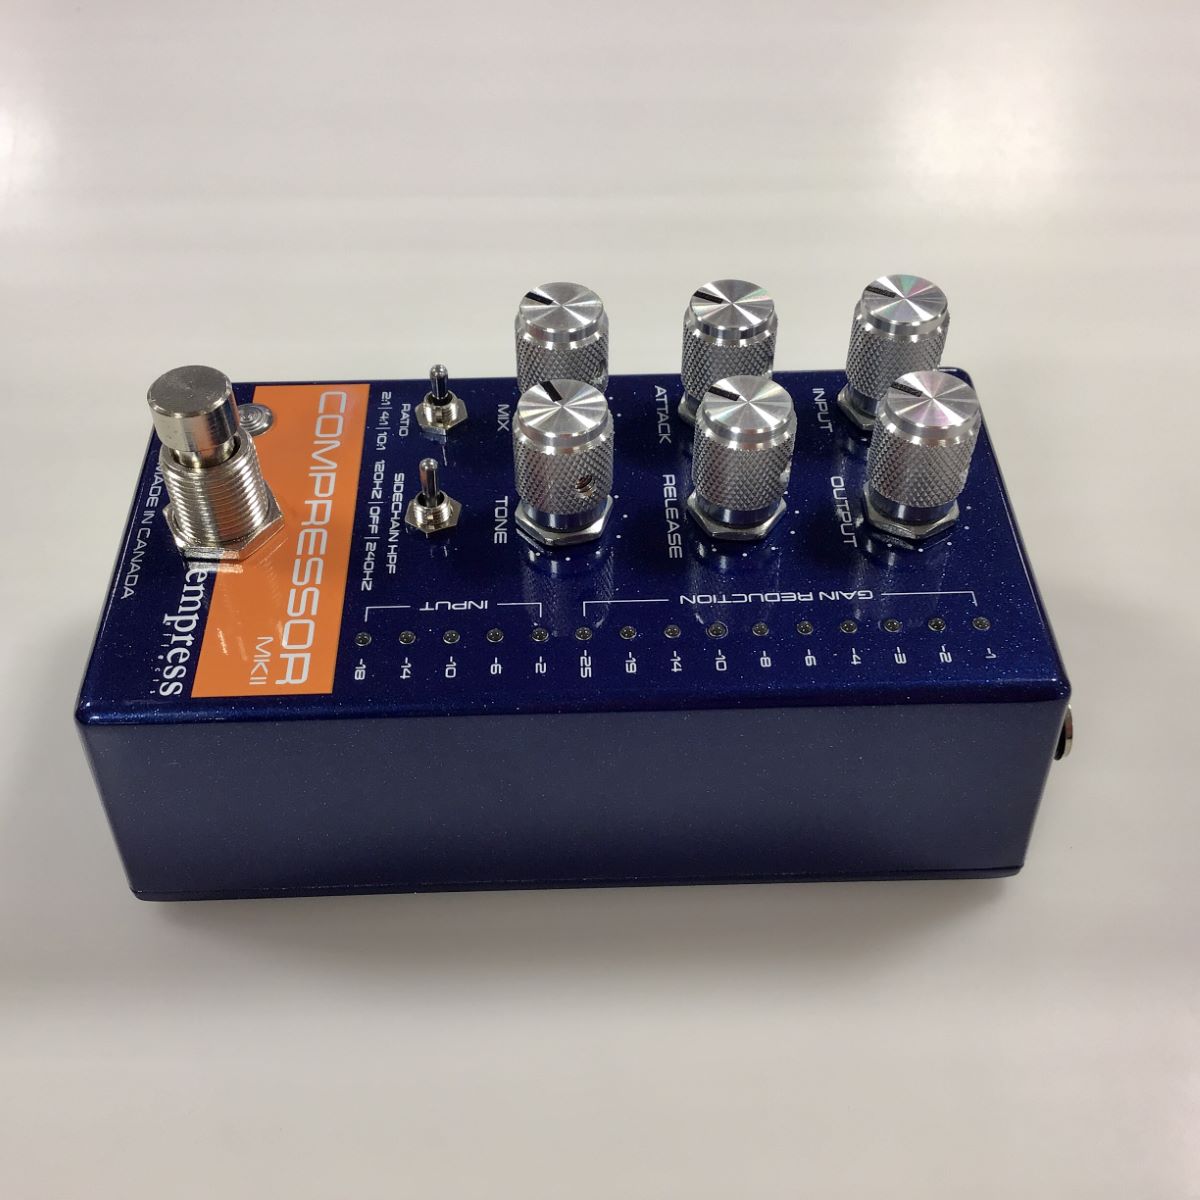 empress effects Compressor MKII Blue コンパクトエフェクター